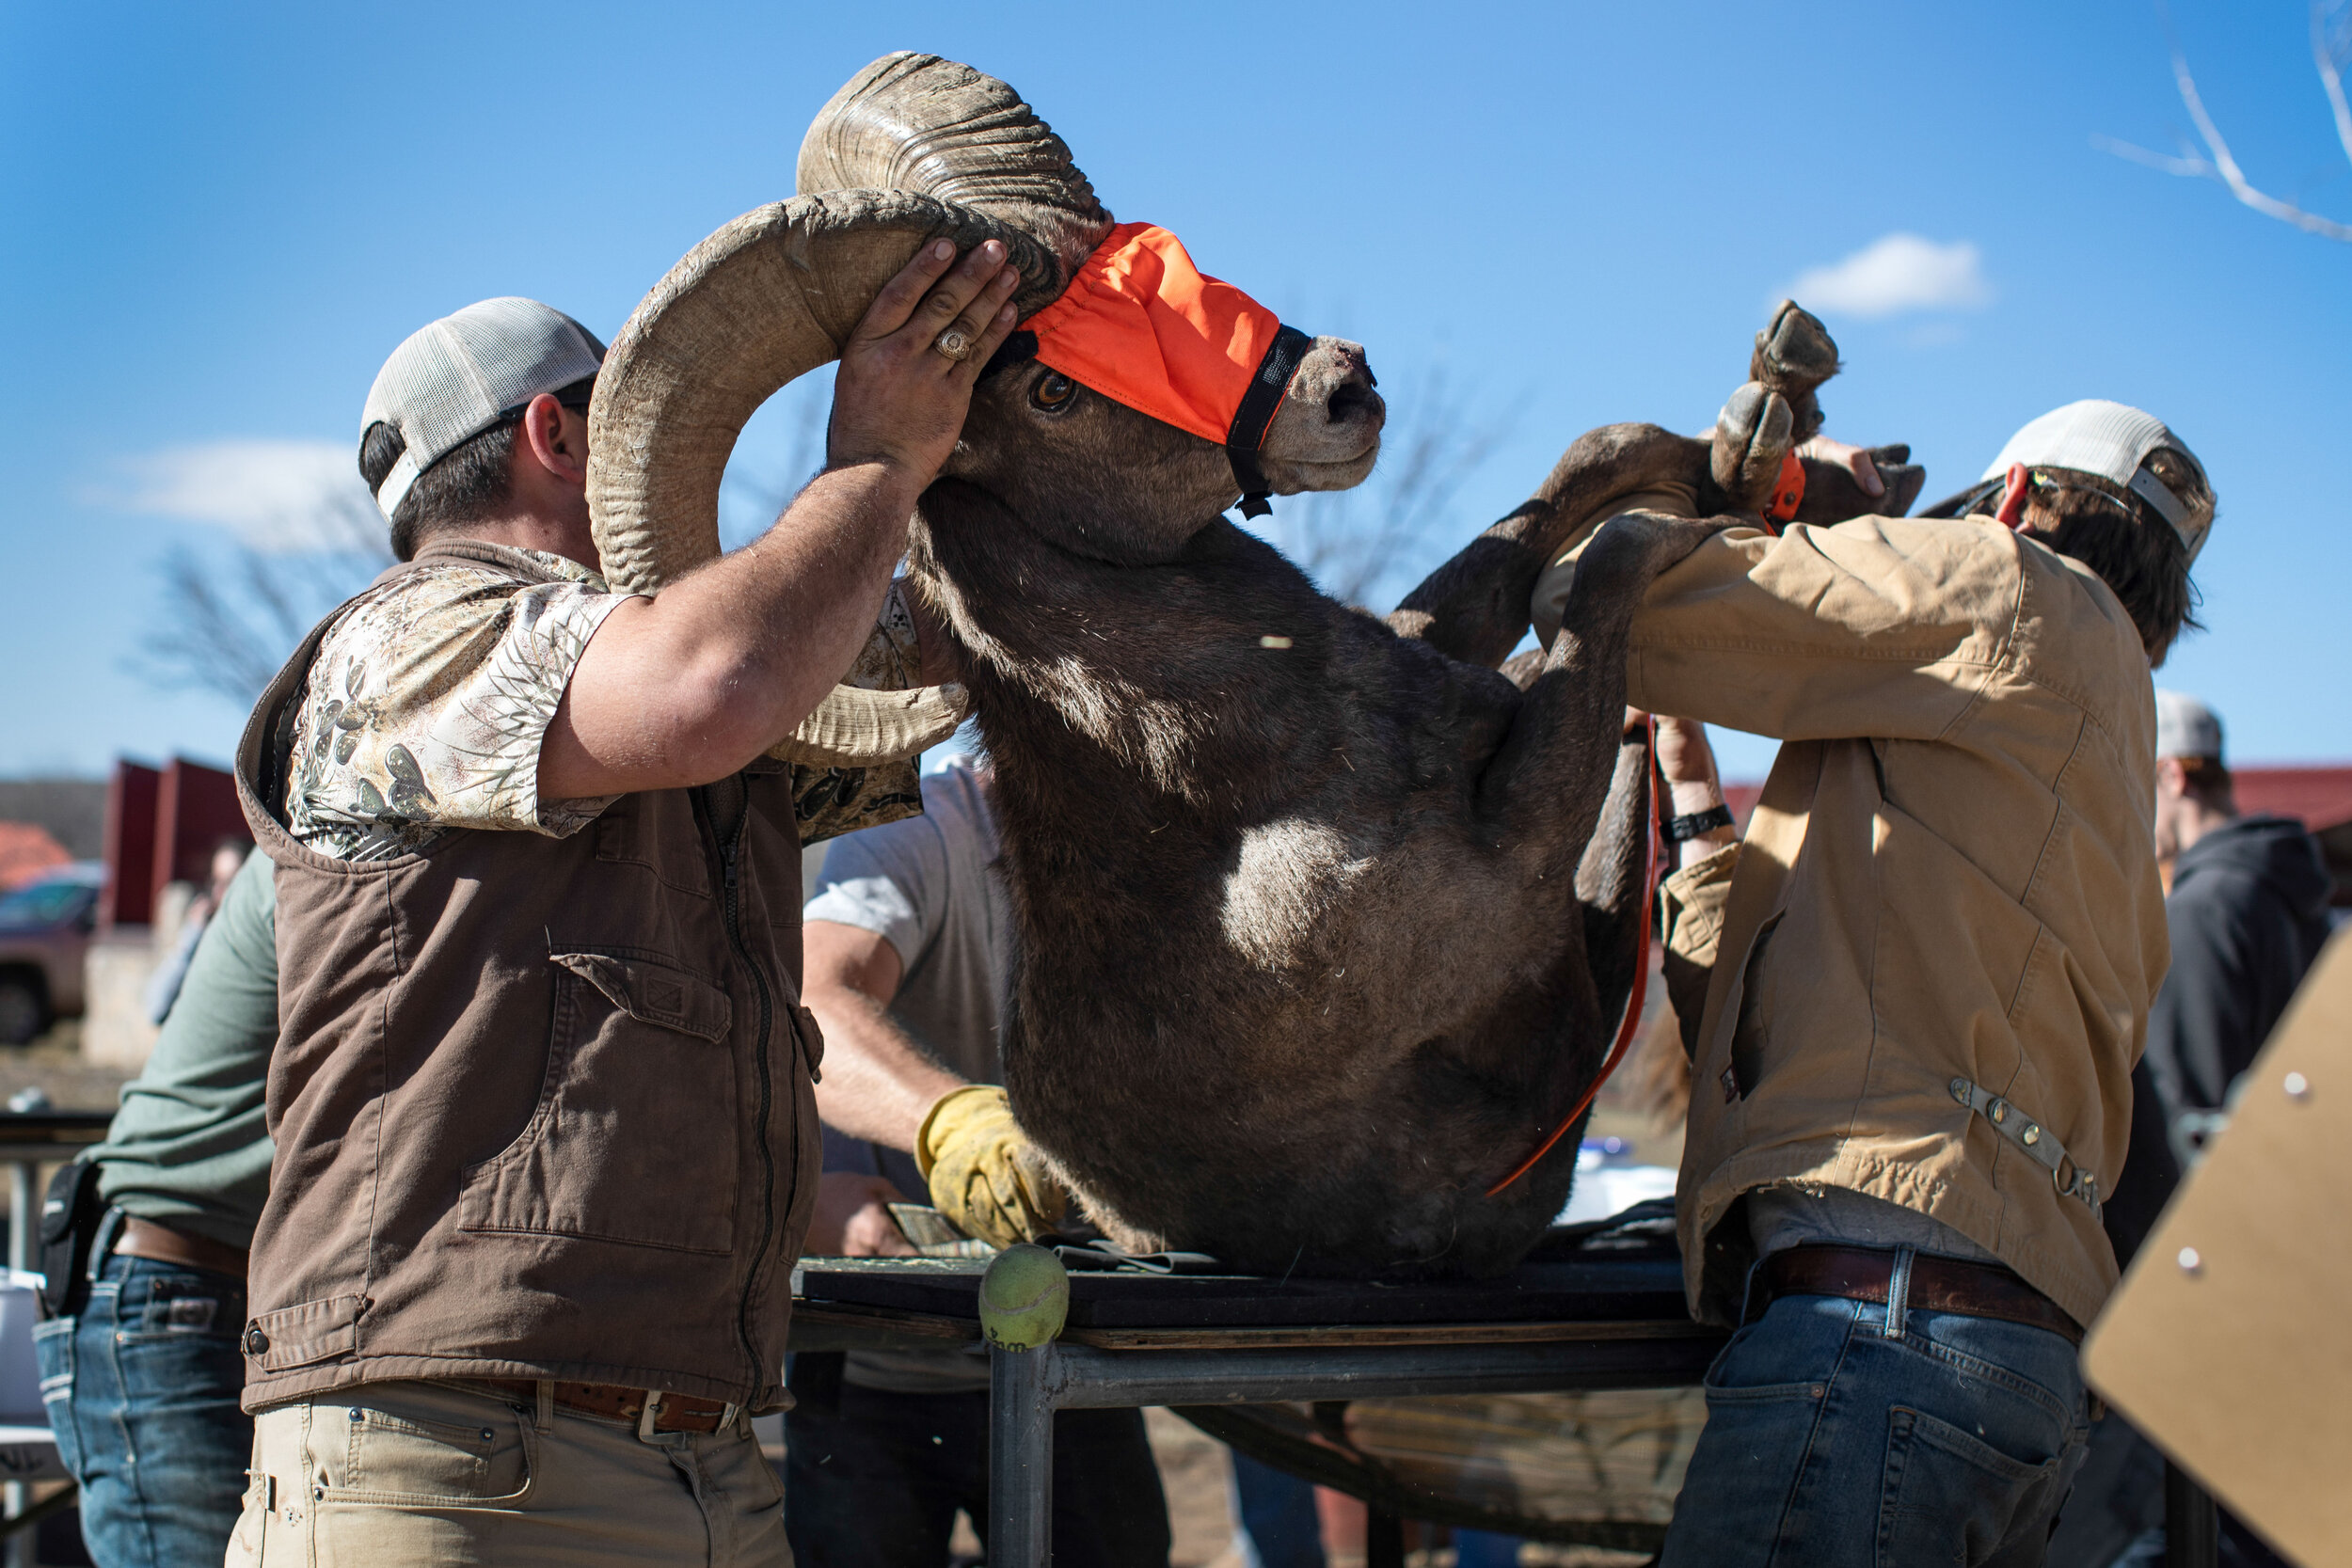  MARATHON, TX. Volunteers lift a Desert Bighorn Sheep from the examination table to transport it to a trailer. After filling trailers with the sheep, the Texas Parks and Wildlife Department transports them to Black Gap 100 miles away. In their new ho